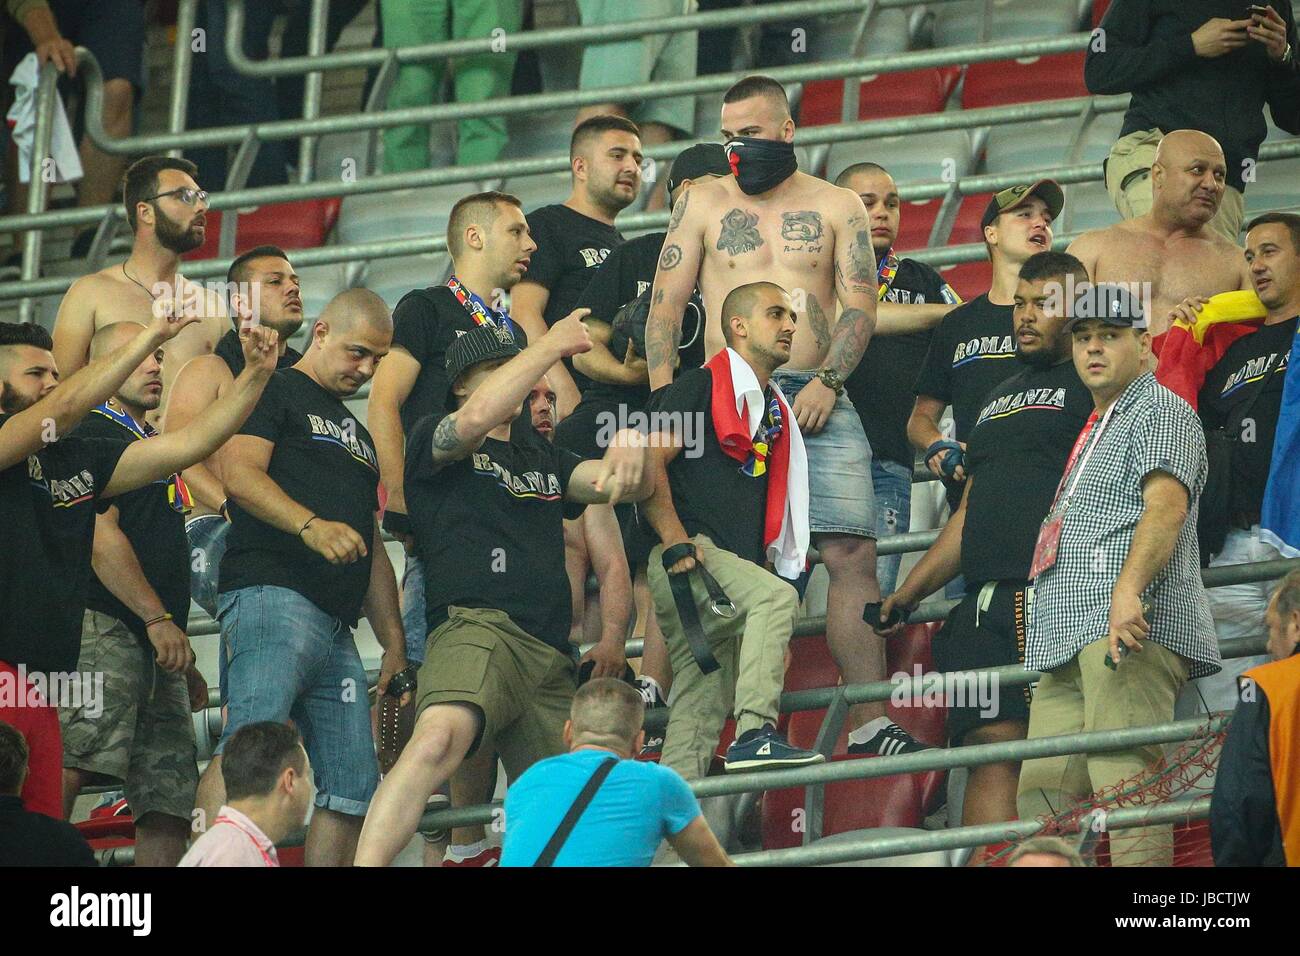 Warsaw, Poland. 10th June, 2017. World Cup 2018 Qualifying Poland vs Romania on June 10, 2017 in Warsaw, Poland   In the picture: romanian hooligans Credit: East News sp. z o.o./Alamy Live News Stock Photo